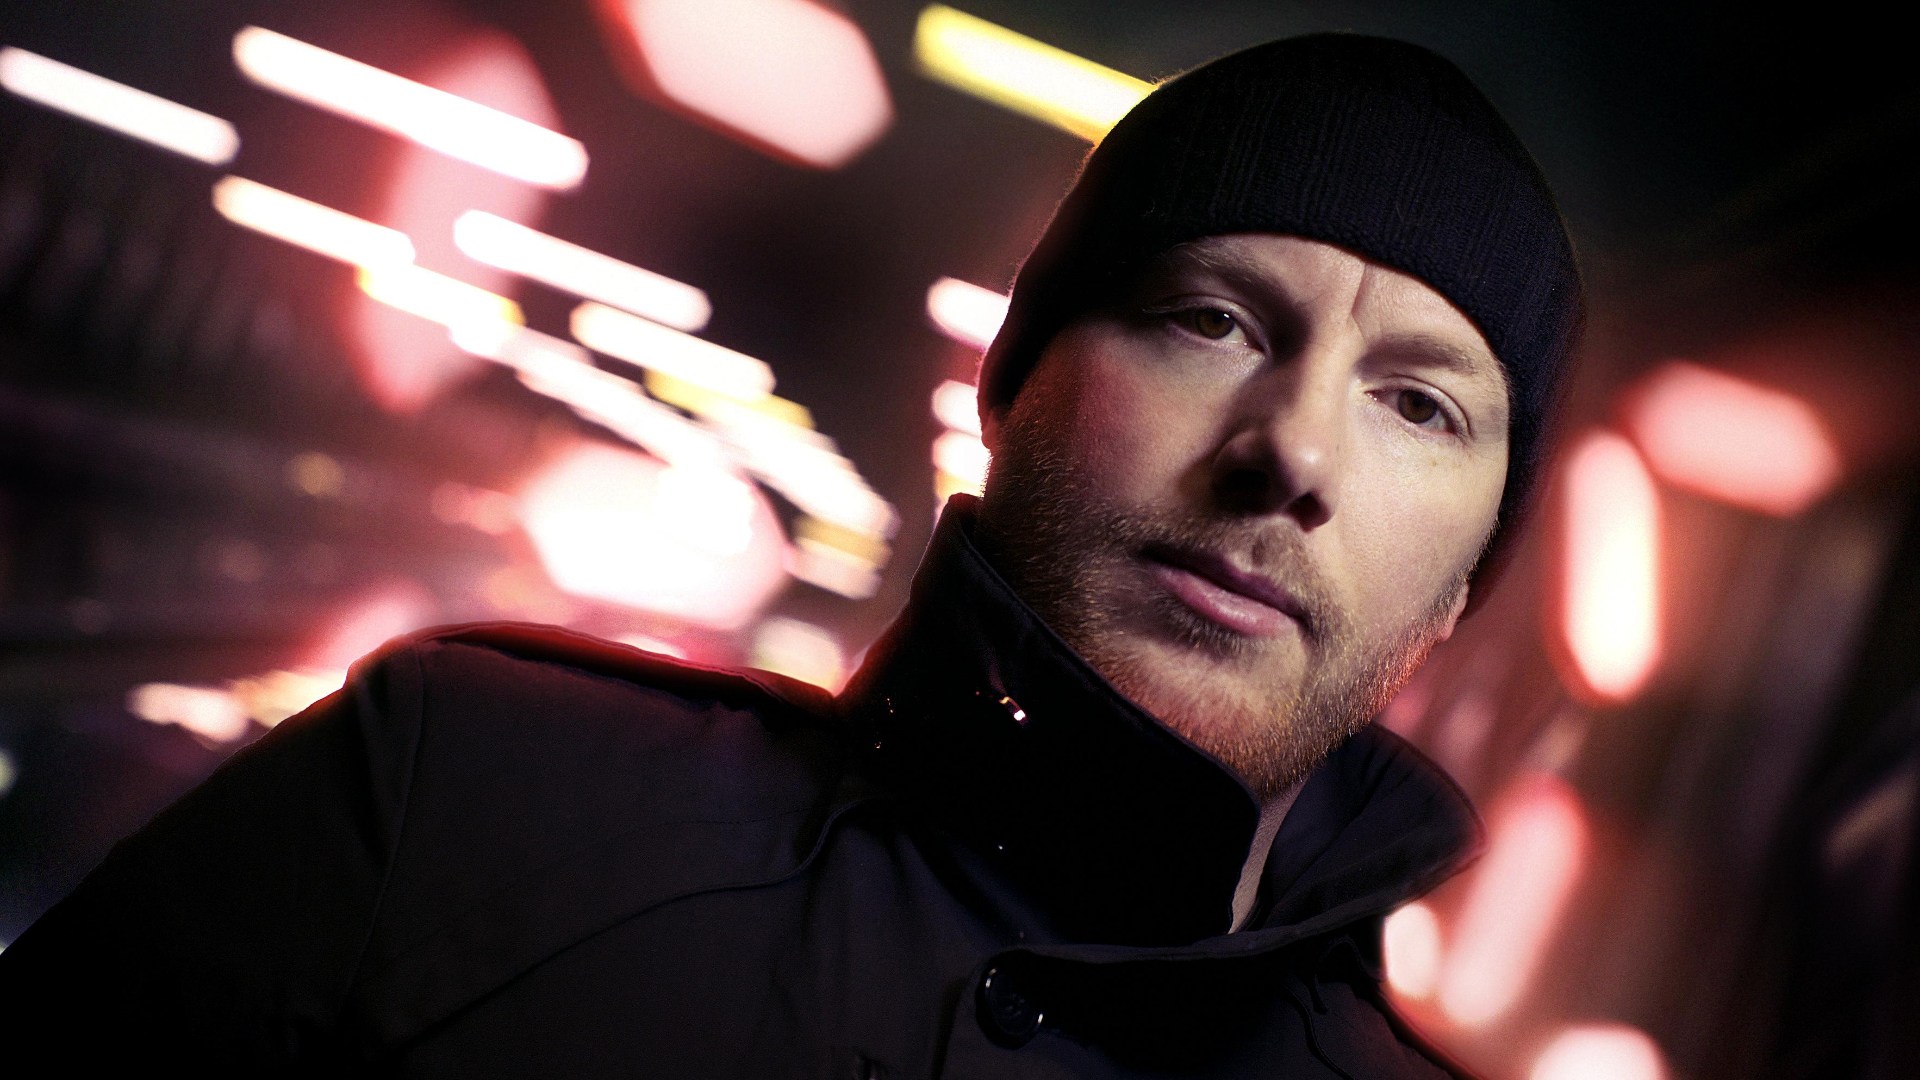 HD Quality Wallpaper | Collection: Music, 1920x1080 Eric Prydz